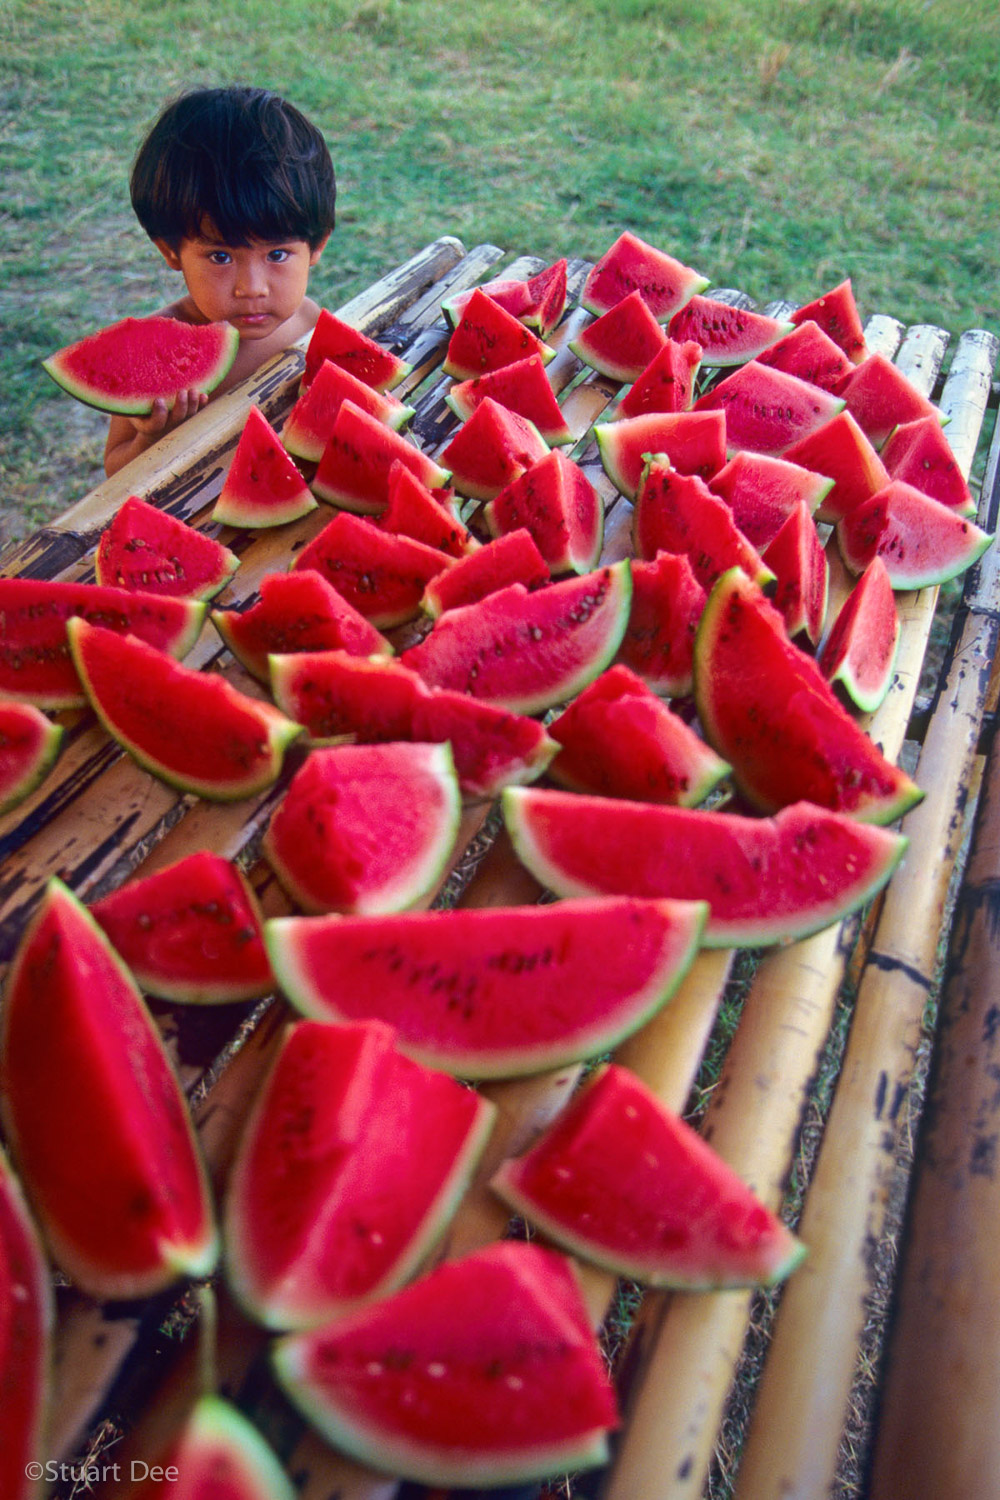  Young boy eating fruit sitting by a table full of sliced watermelon, Iloilo, Philippines  R 